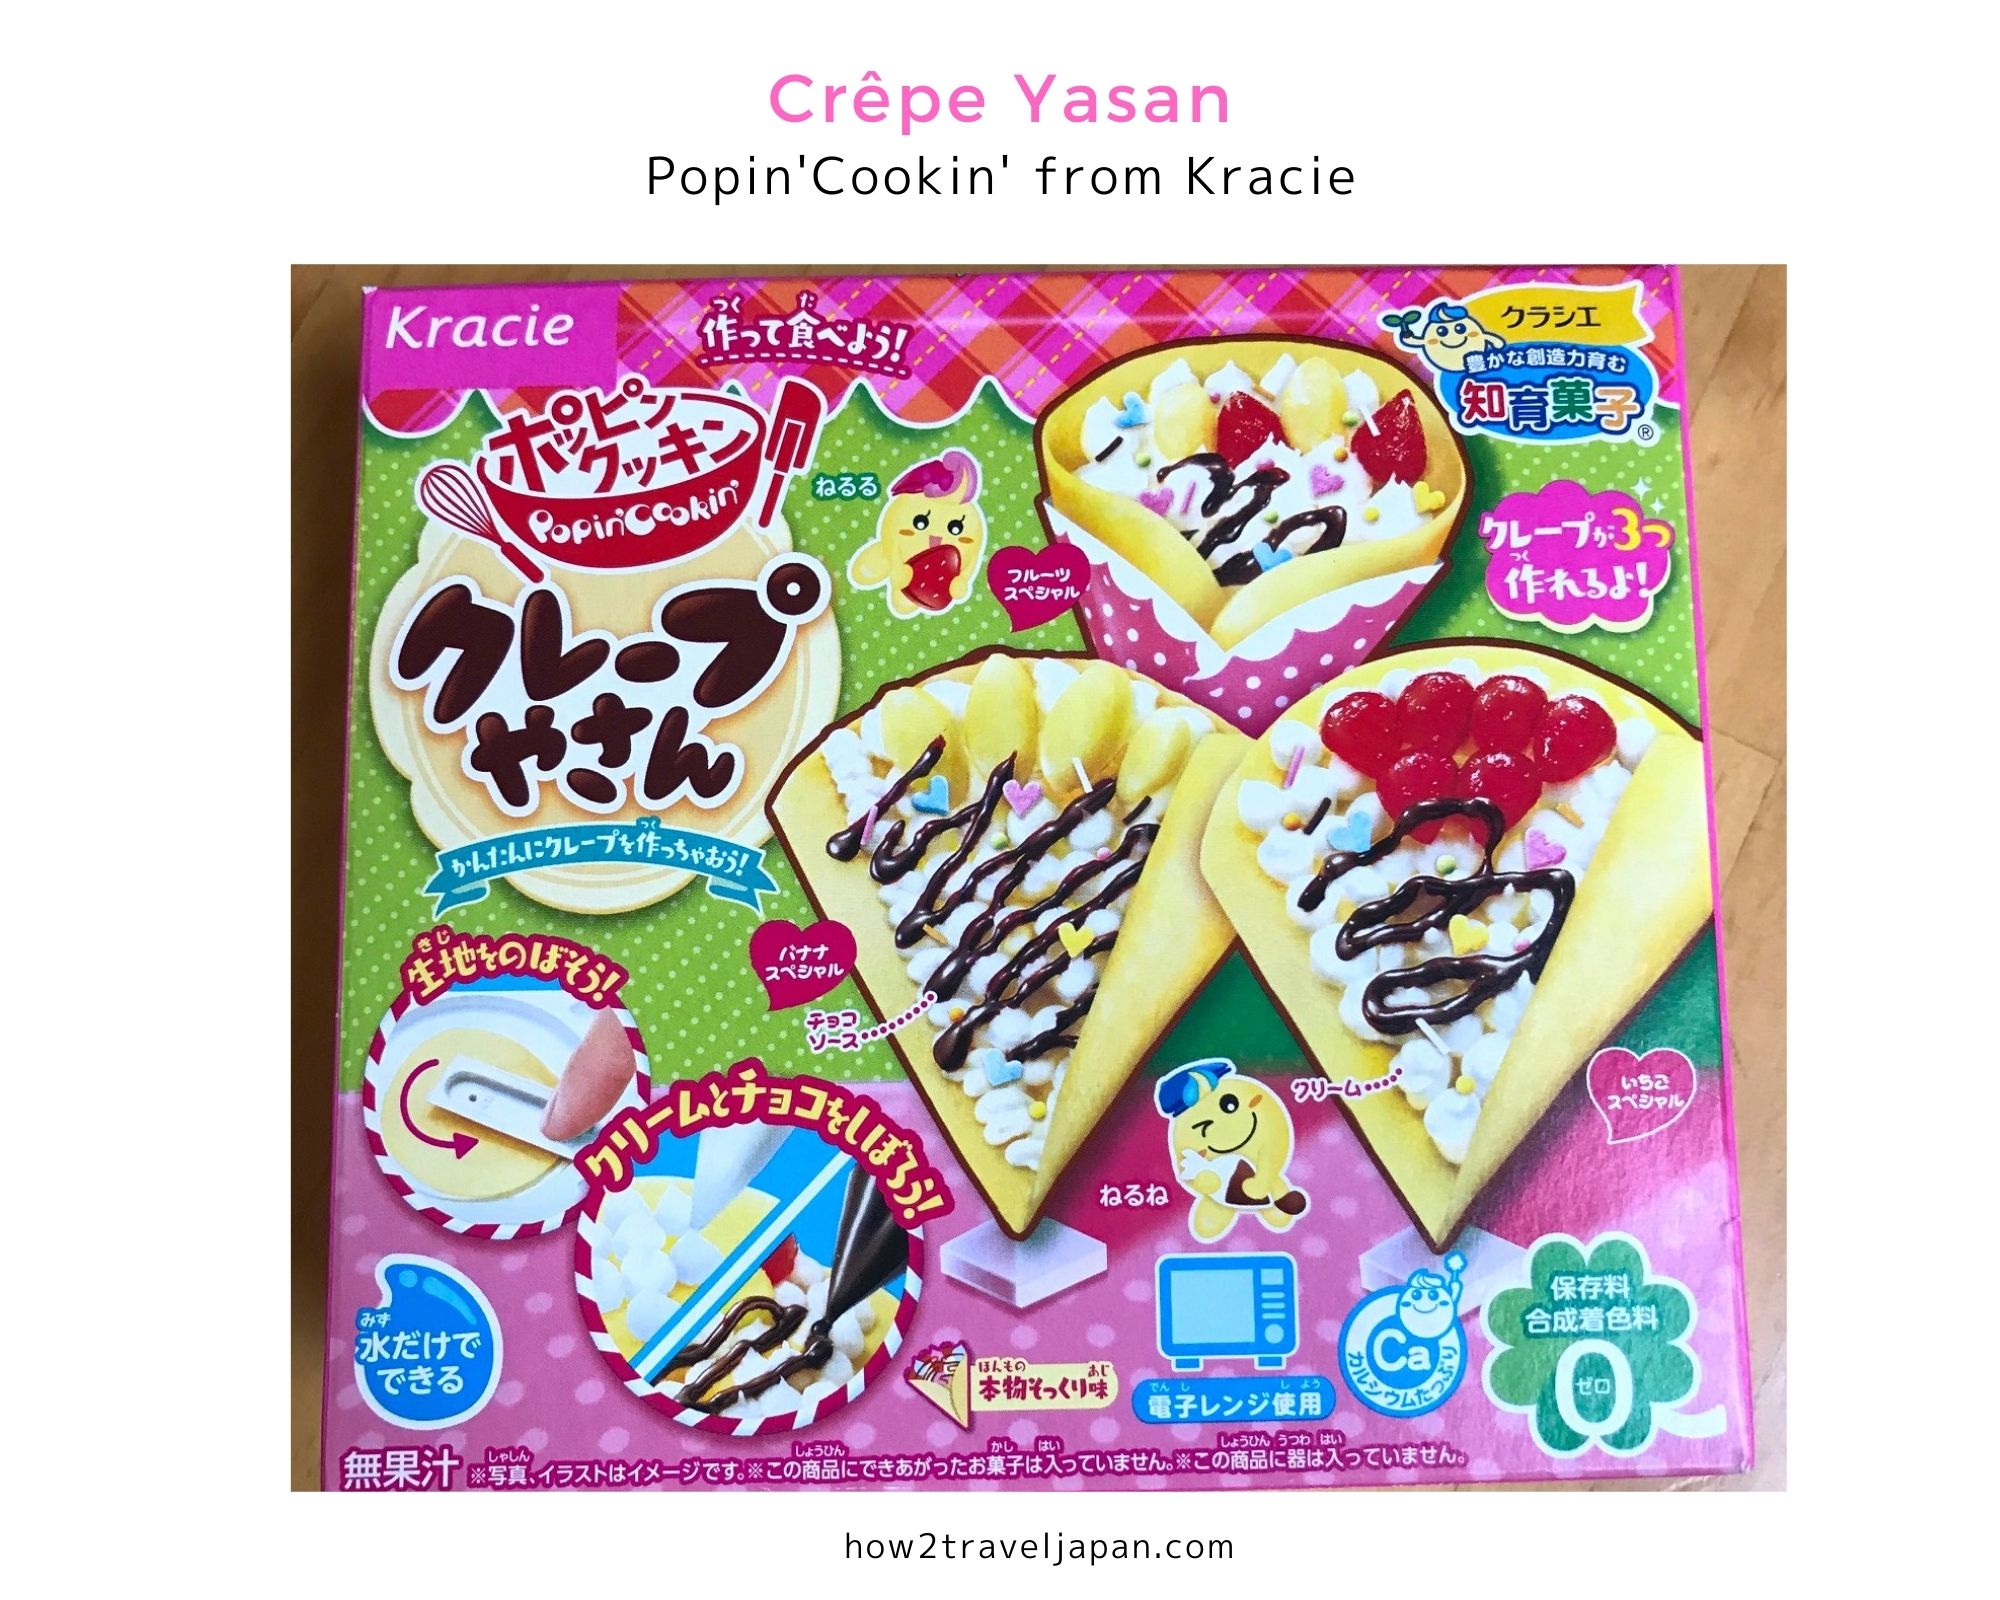 You are currently viewing 【Crêpe yasan】 by Popin’Cookin’ from KRACIE